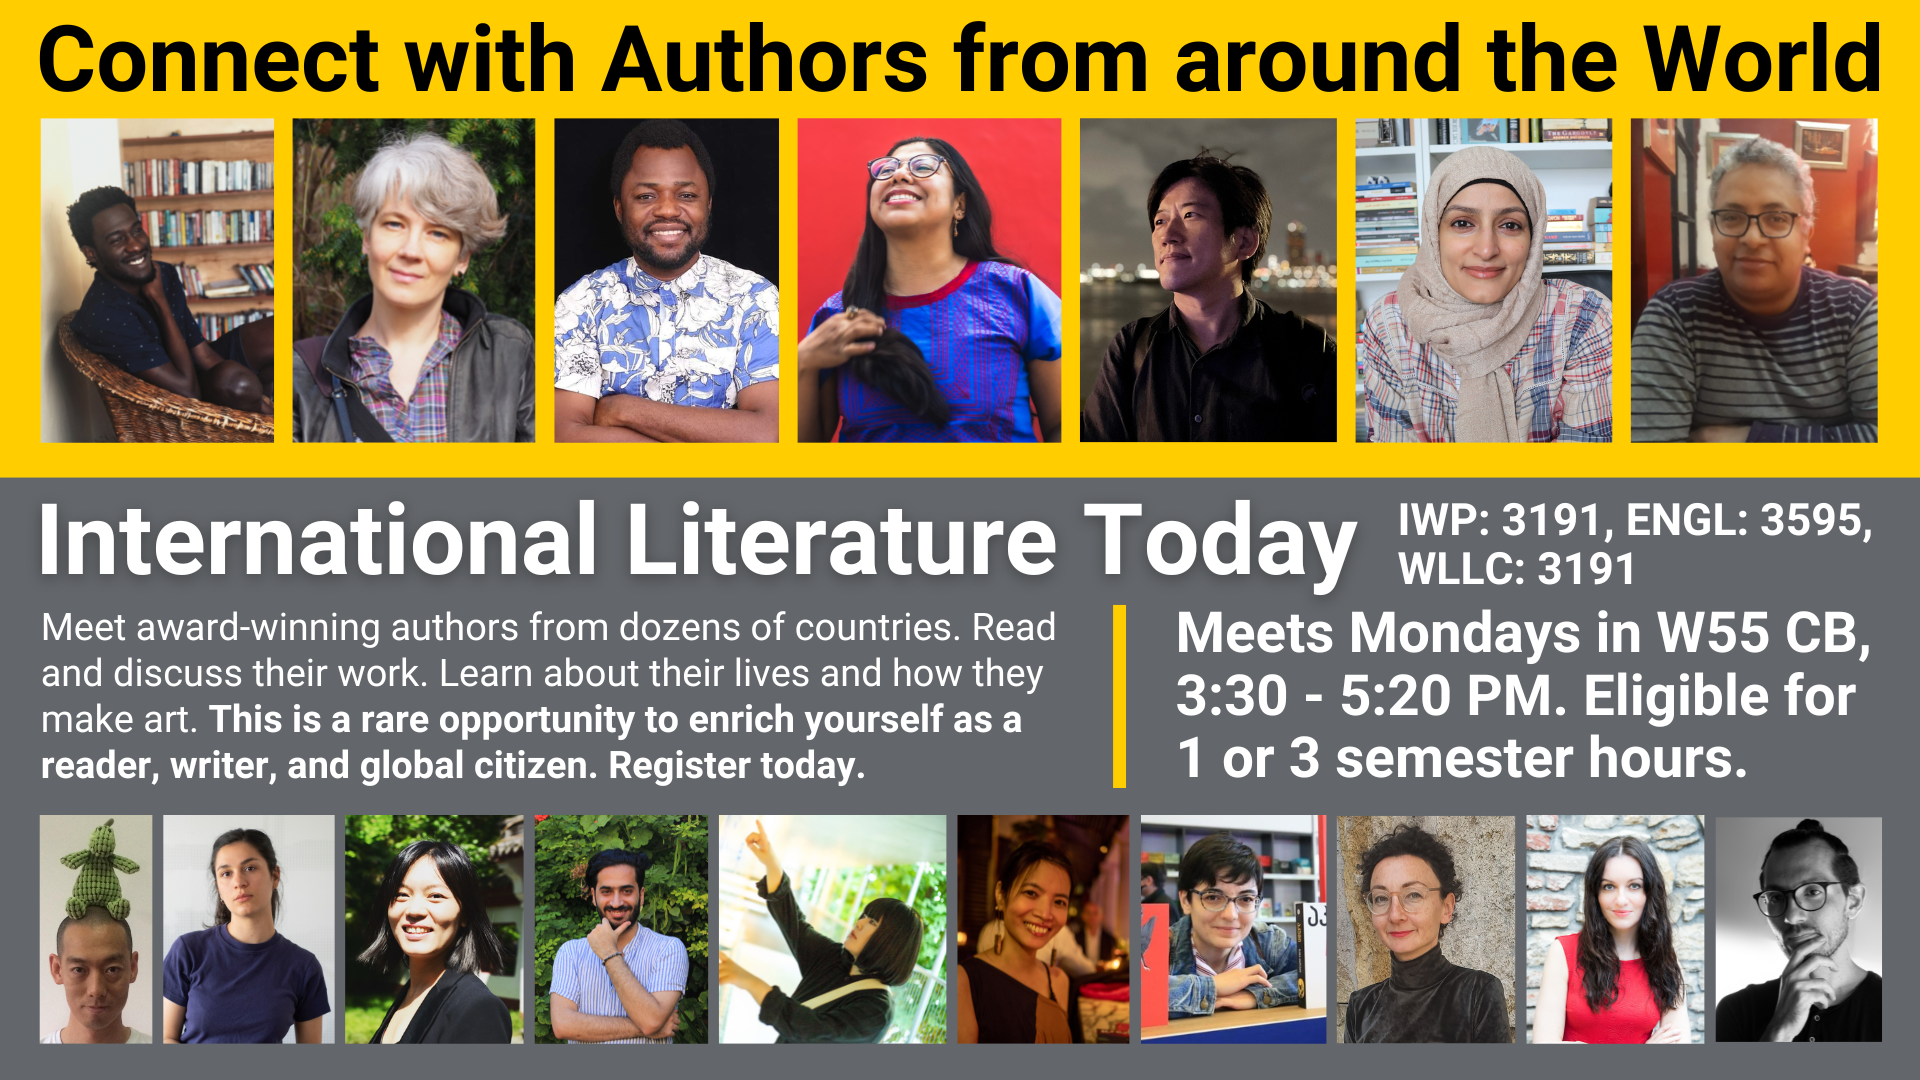 Connect with Authors from around the World International Literature Today IWP: 3191, ENGL: 3595, WLLC: 3191 Meet award-winning authors from dozens of countries. Read and discuss their work. Learn about their lives and how they make art. This is a rare opportunity to enrich yourself as a reader, writer, and global citizen. Register today. Meets Mondays in W55 CB, 3:30 - 5:20 PM. Eligible for 1 or 3 semester hours.